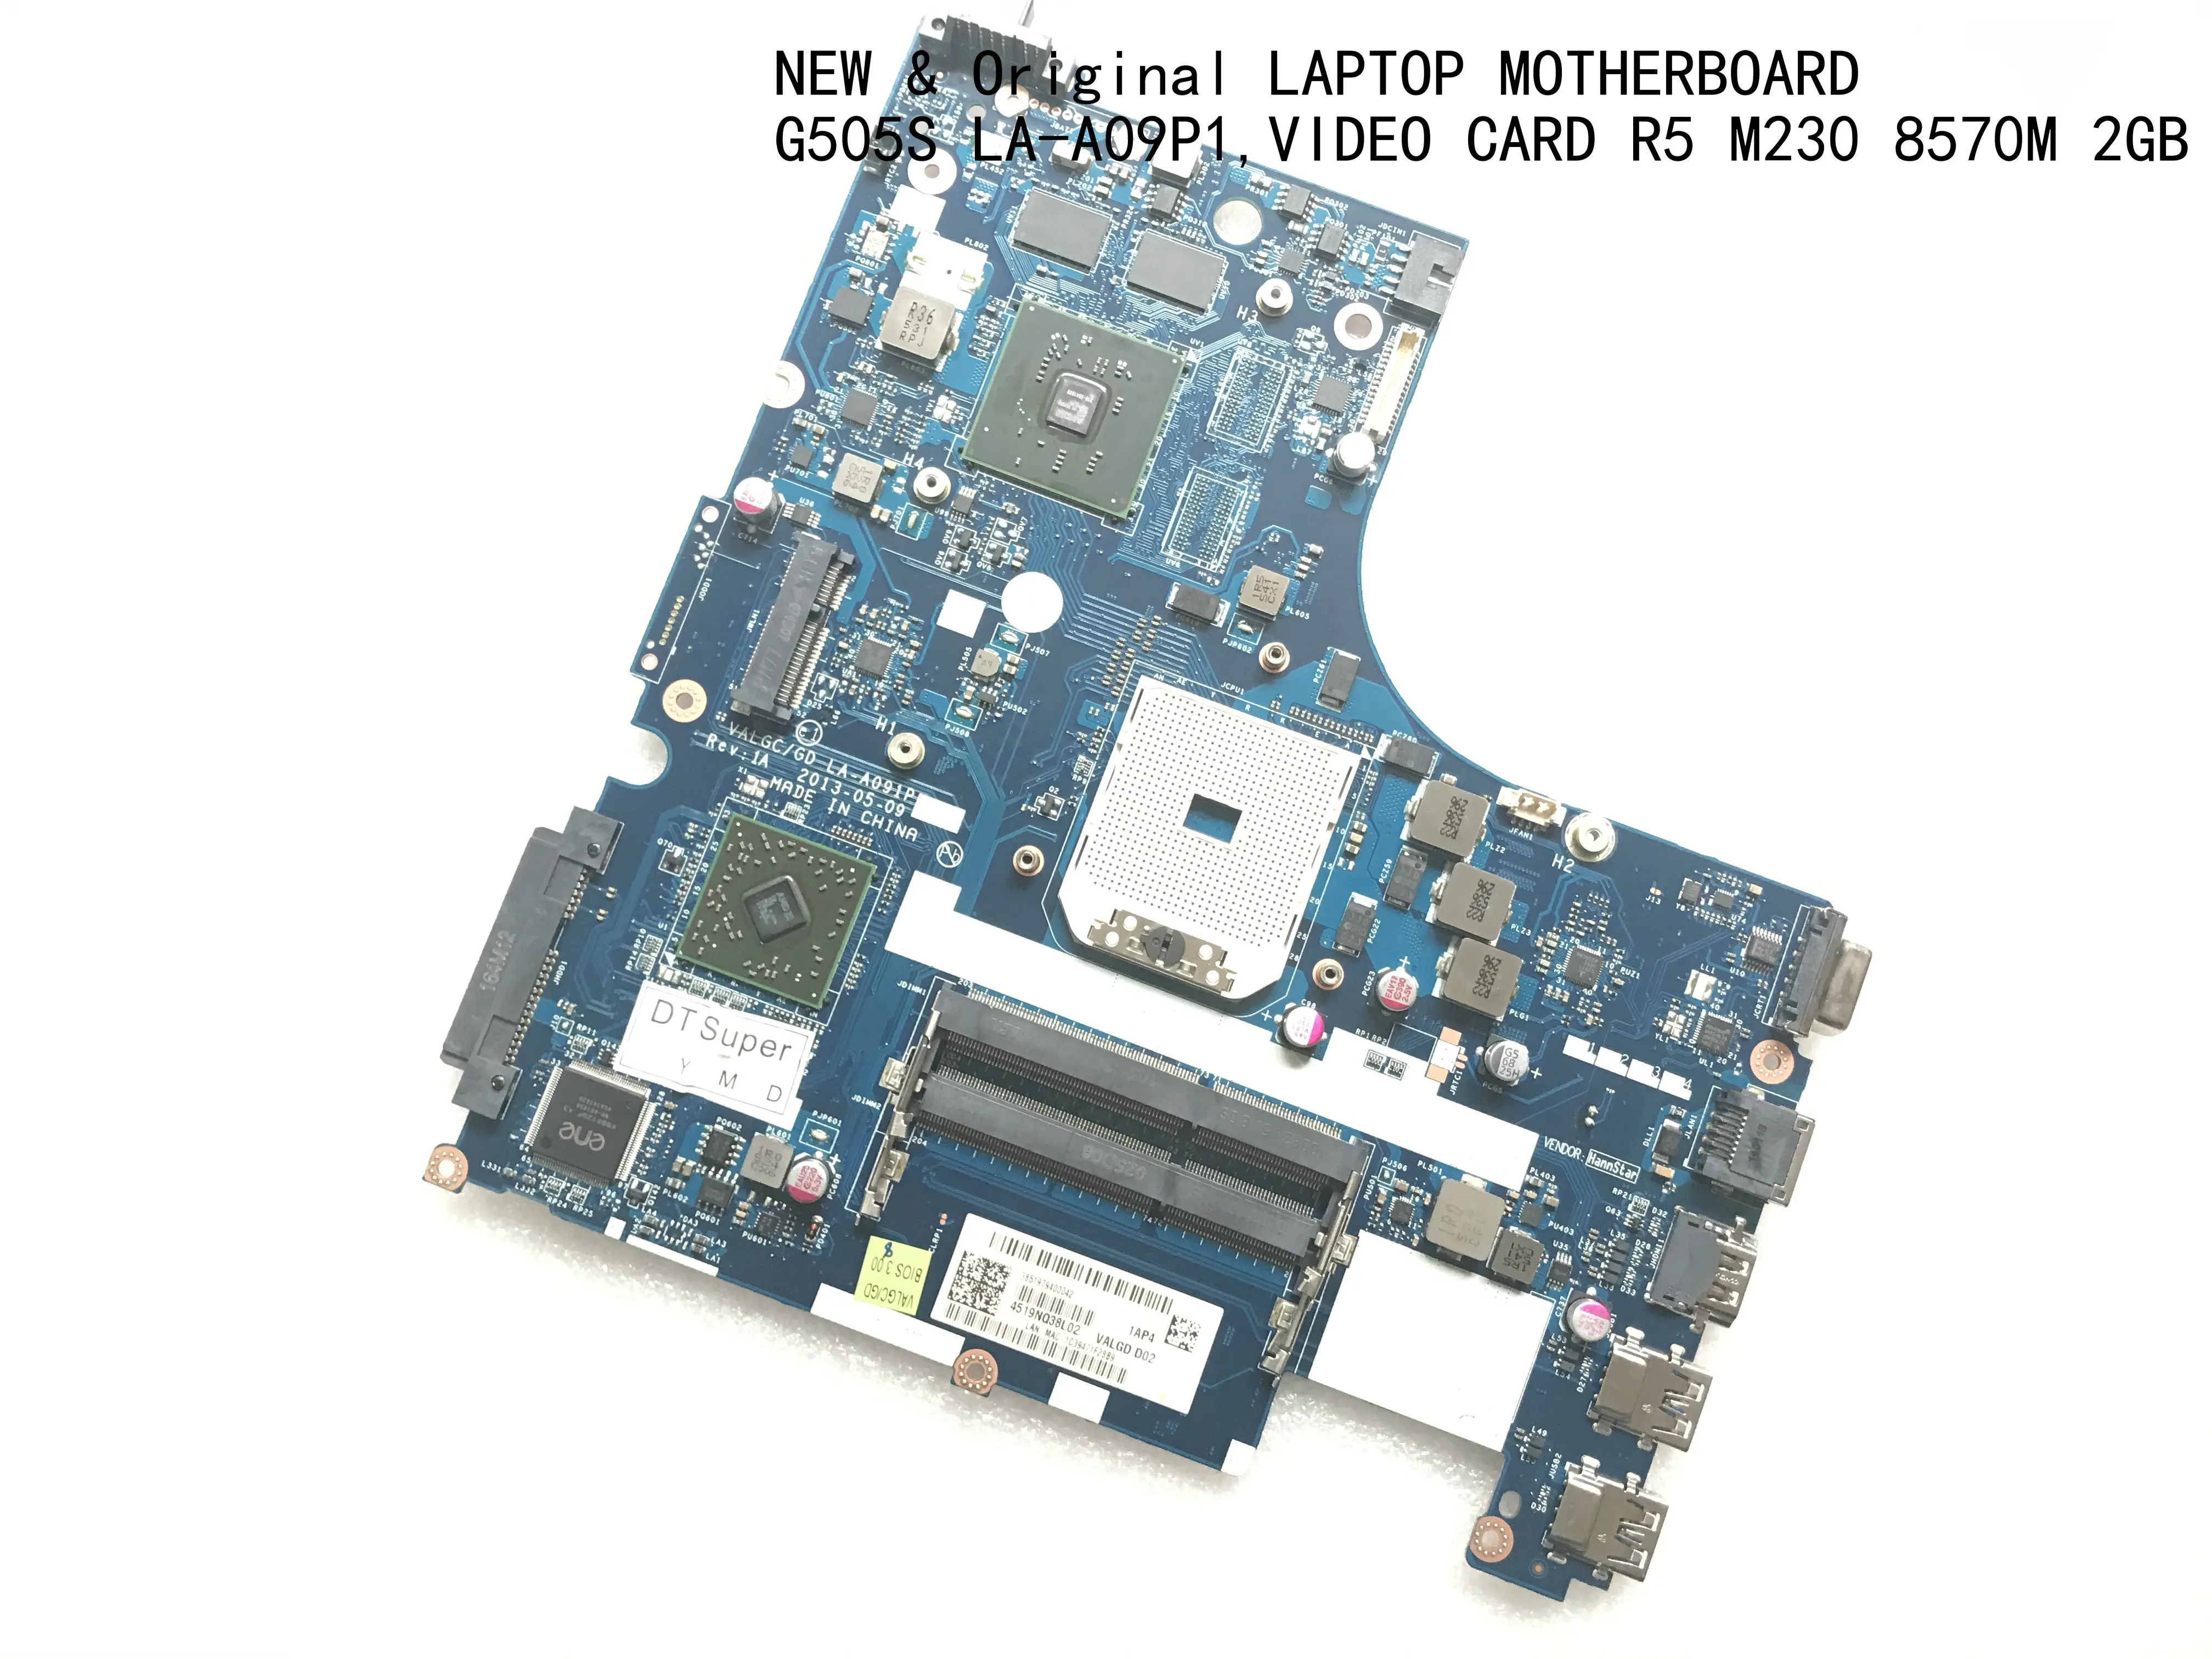 FAST SHIPPING NEW ITEM VALGC/GD LA-A091P G505S MAINBOARD FOR LENOVO G505S MOTHERBOARD ,VIDEO CARD R5 M230 8570M 2GB